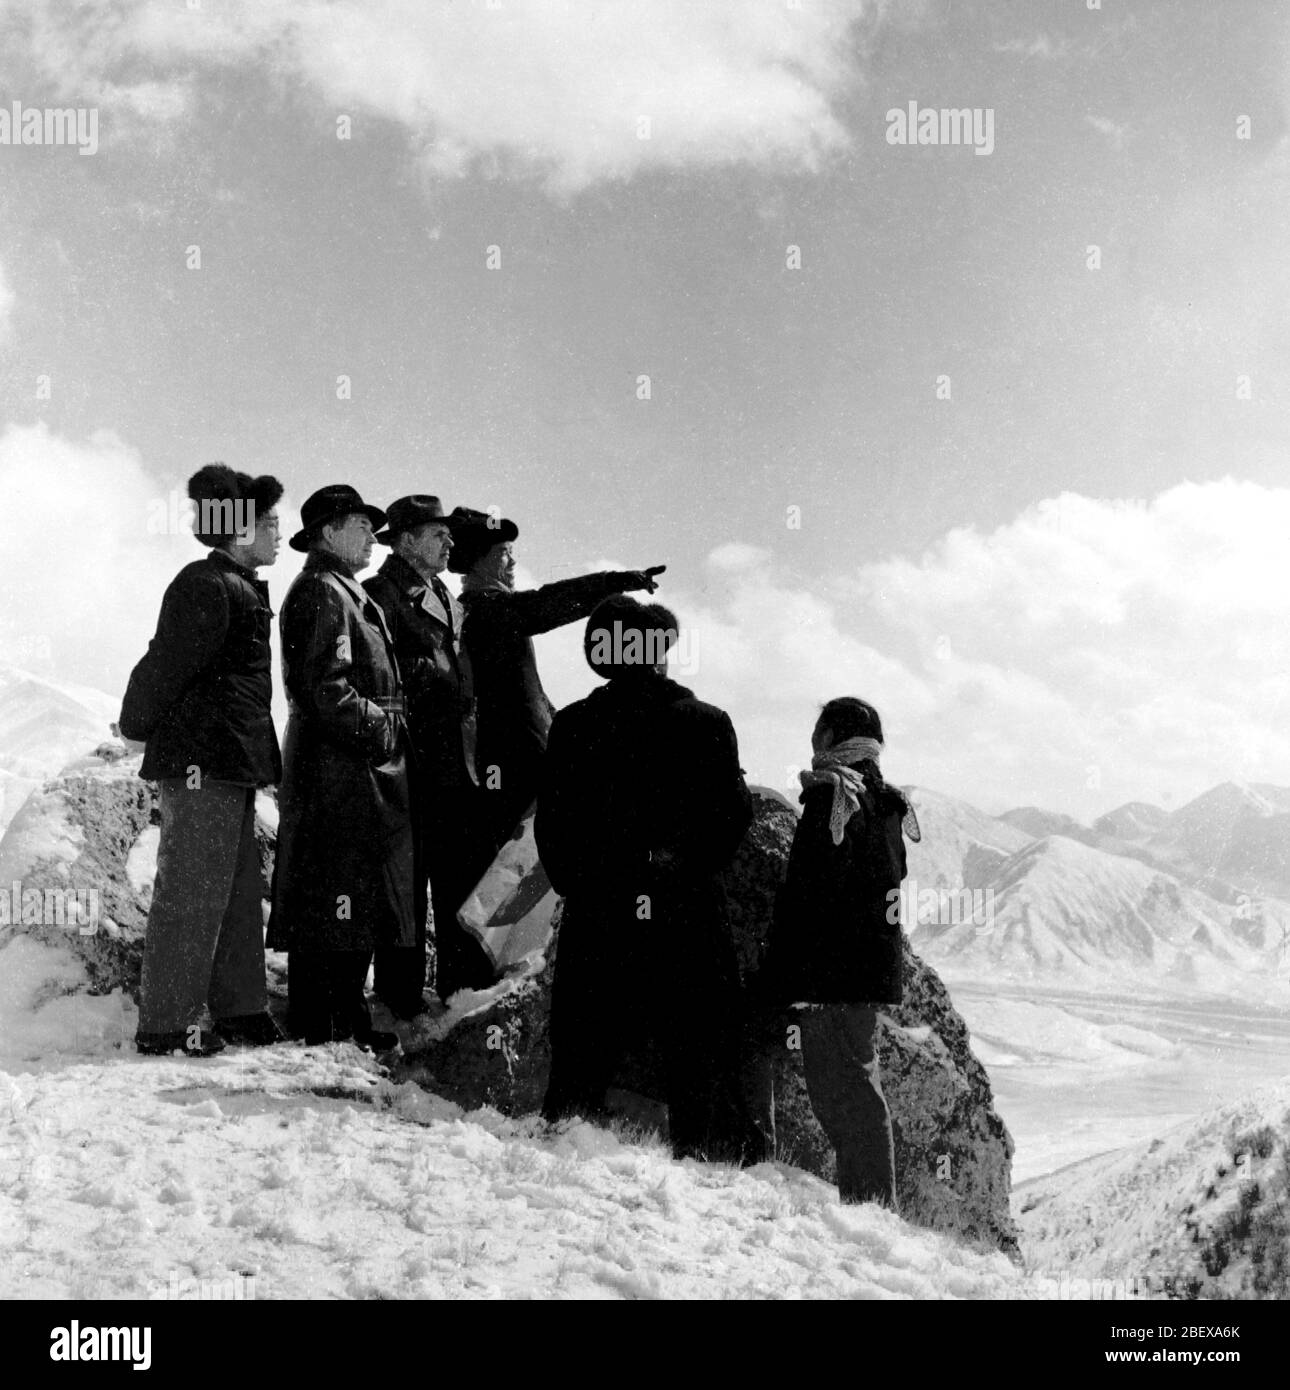 In October 1957 the staff surveying the Qinghai-Tibet Railway was in the Qaidam Basin Stock Photo